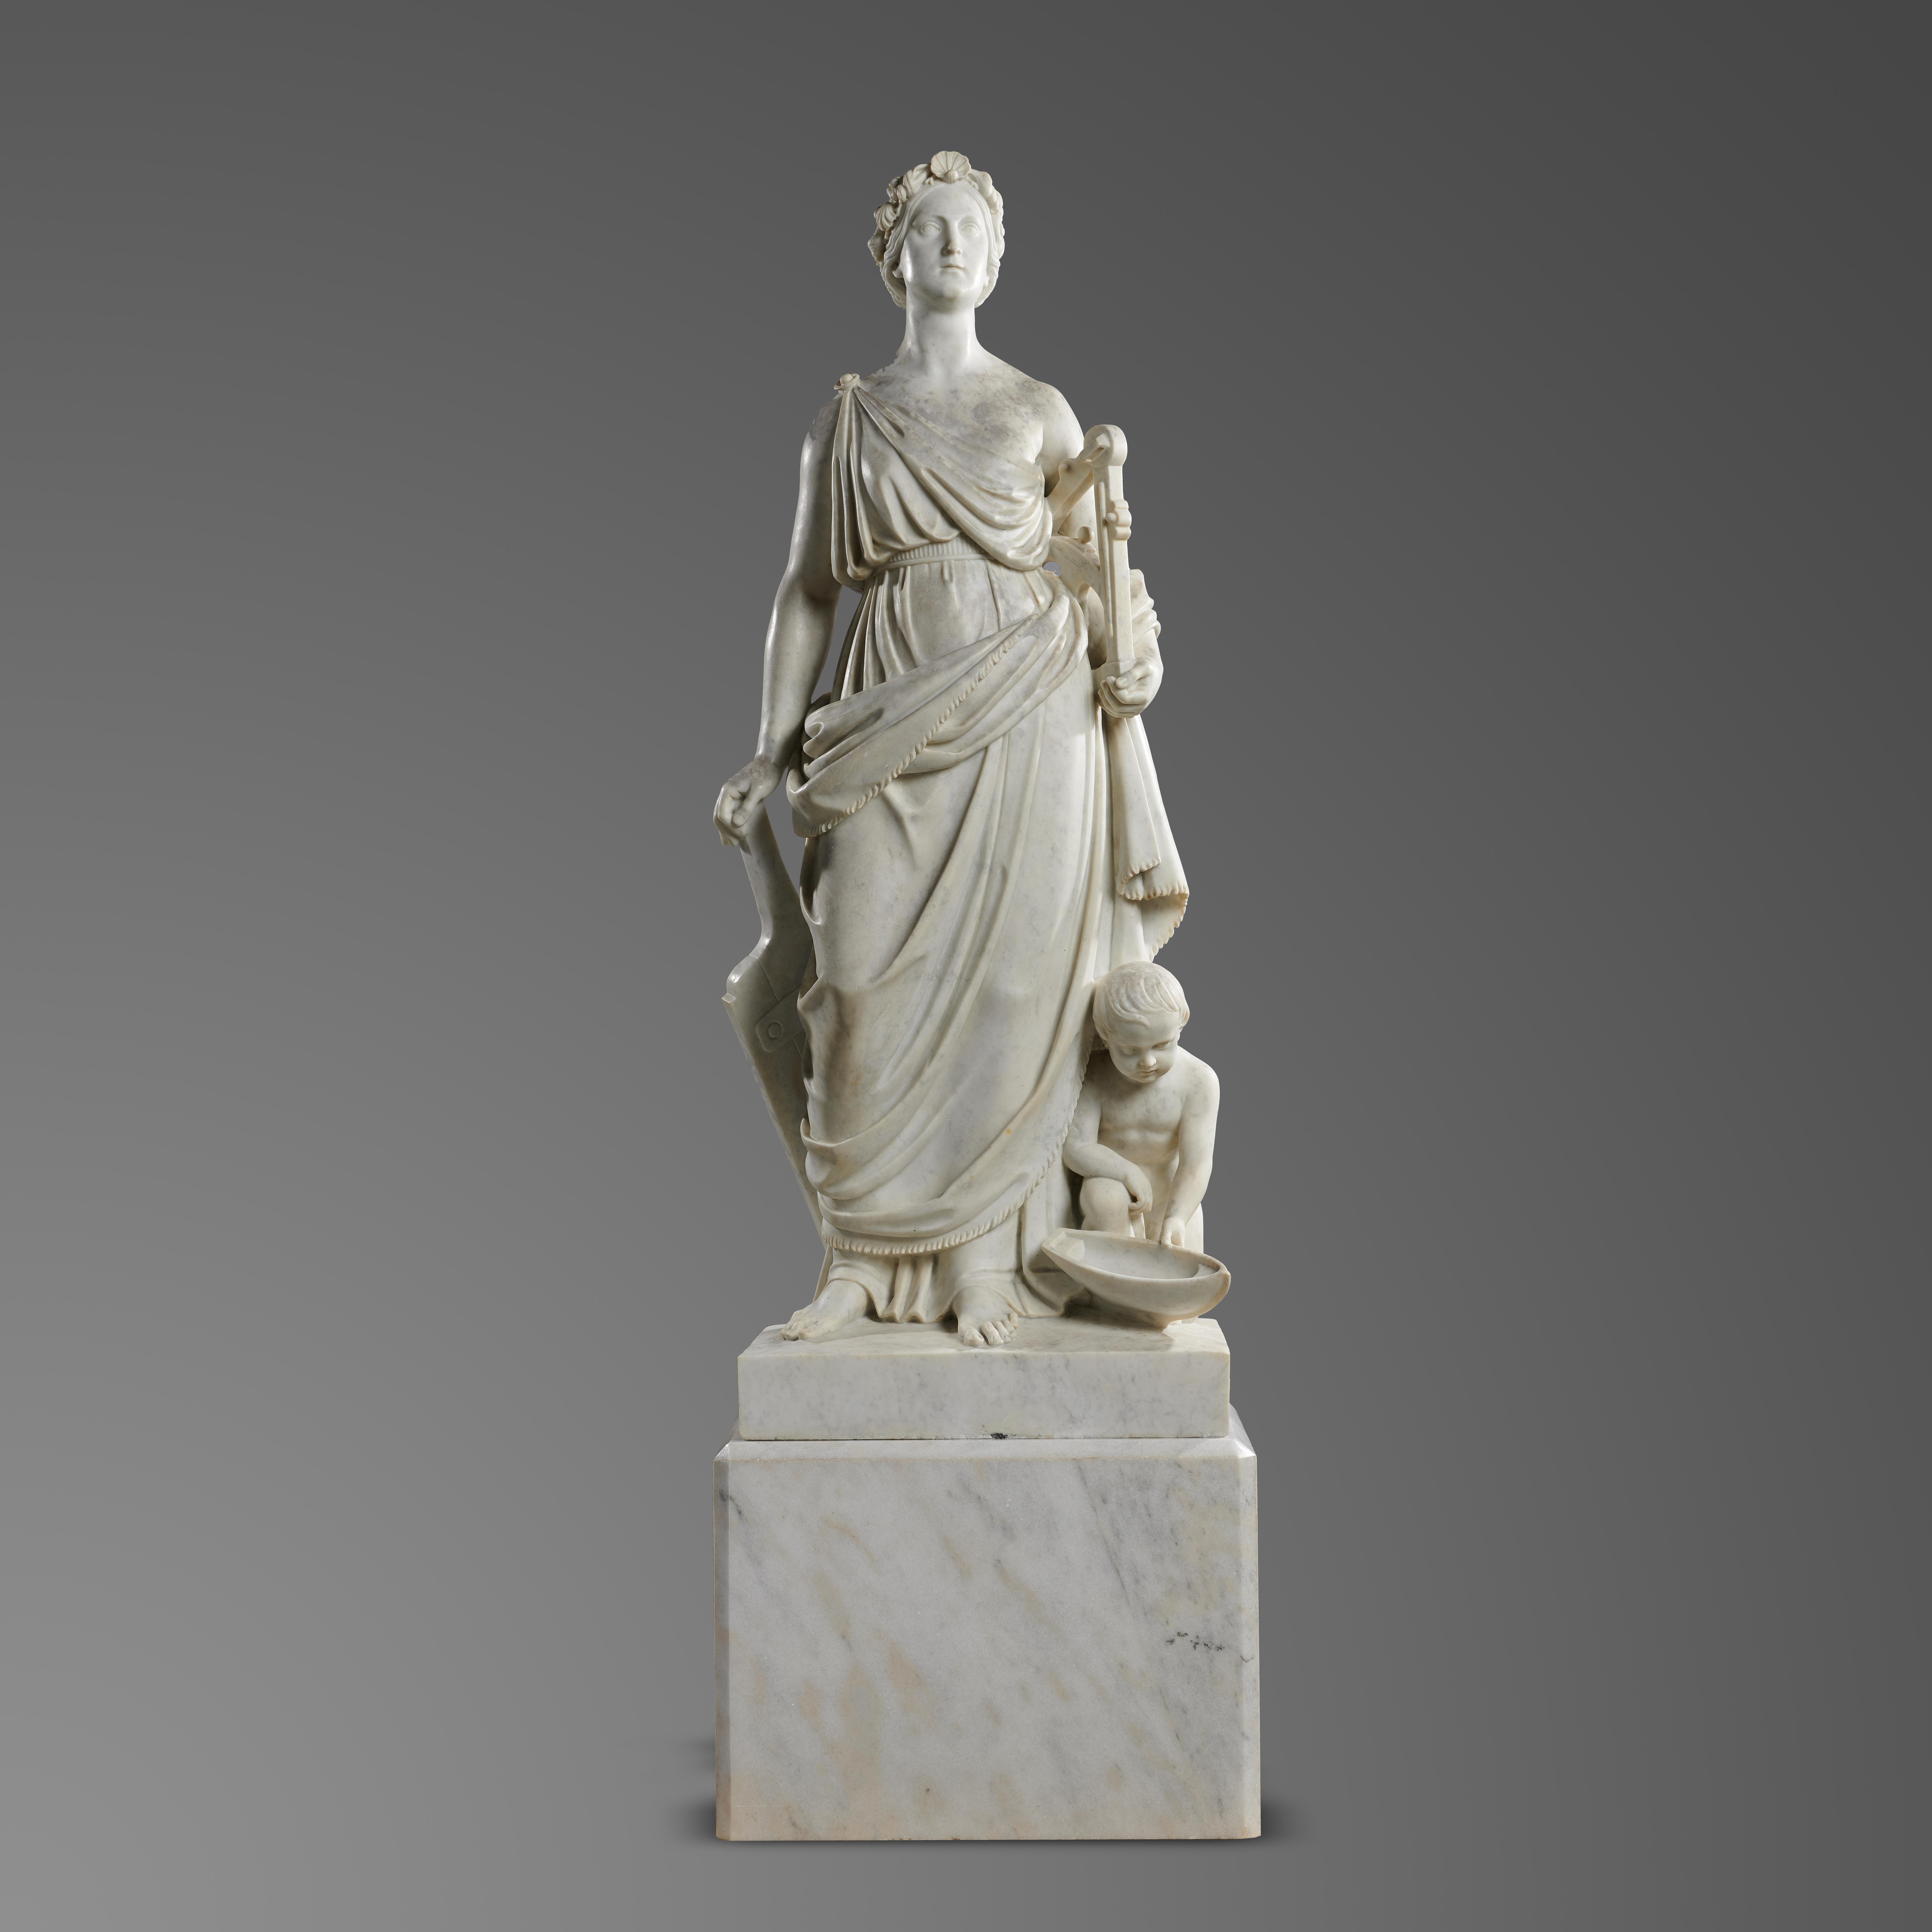 Adolfo Cipriani: A carved white marble figure representing Navigation late 19th century signed A Cipriani  on later marble plinth 198cm high overall ...